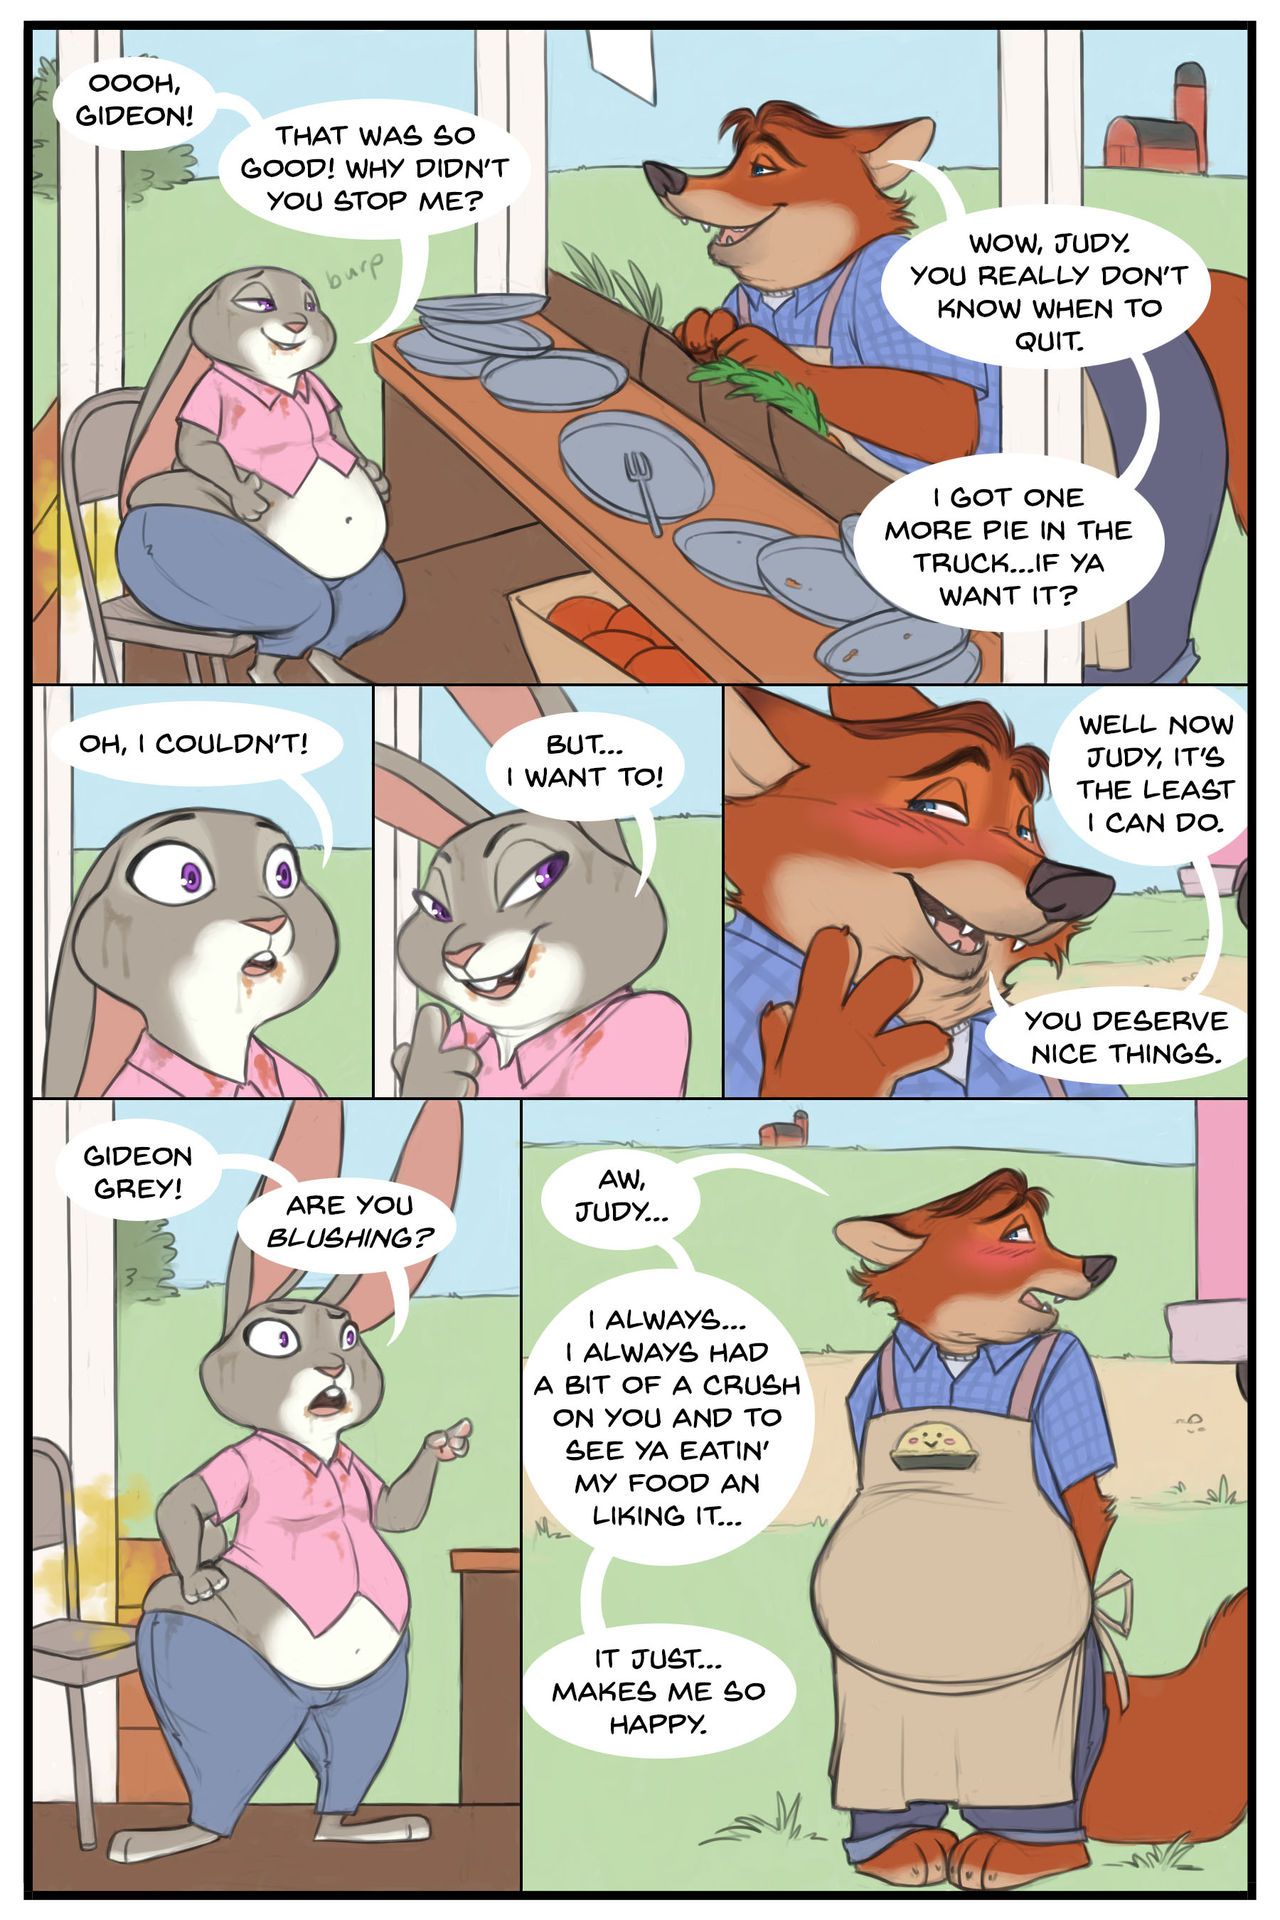 Don't Know When to Quit (Zootopia) 6